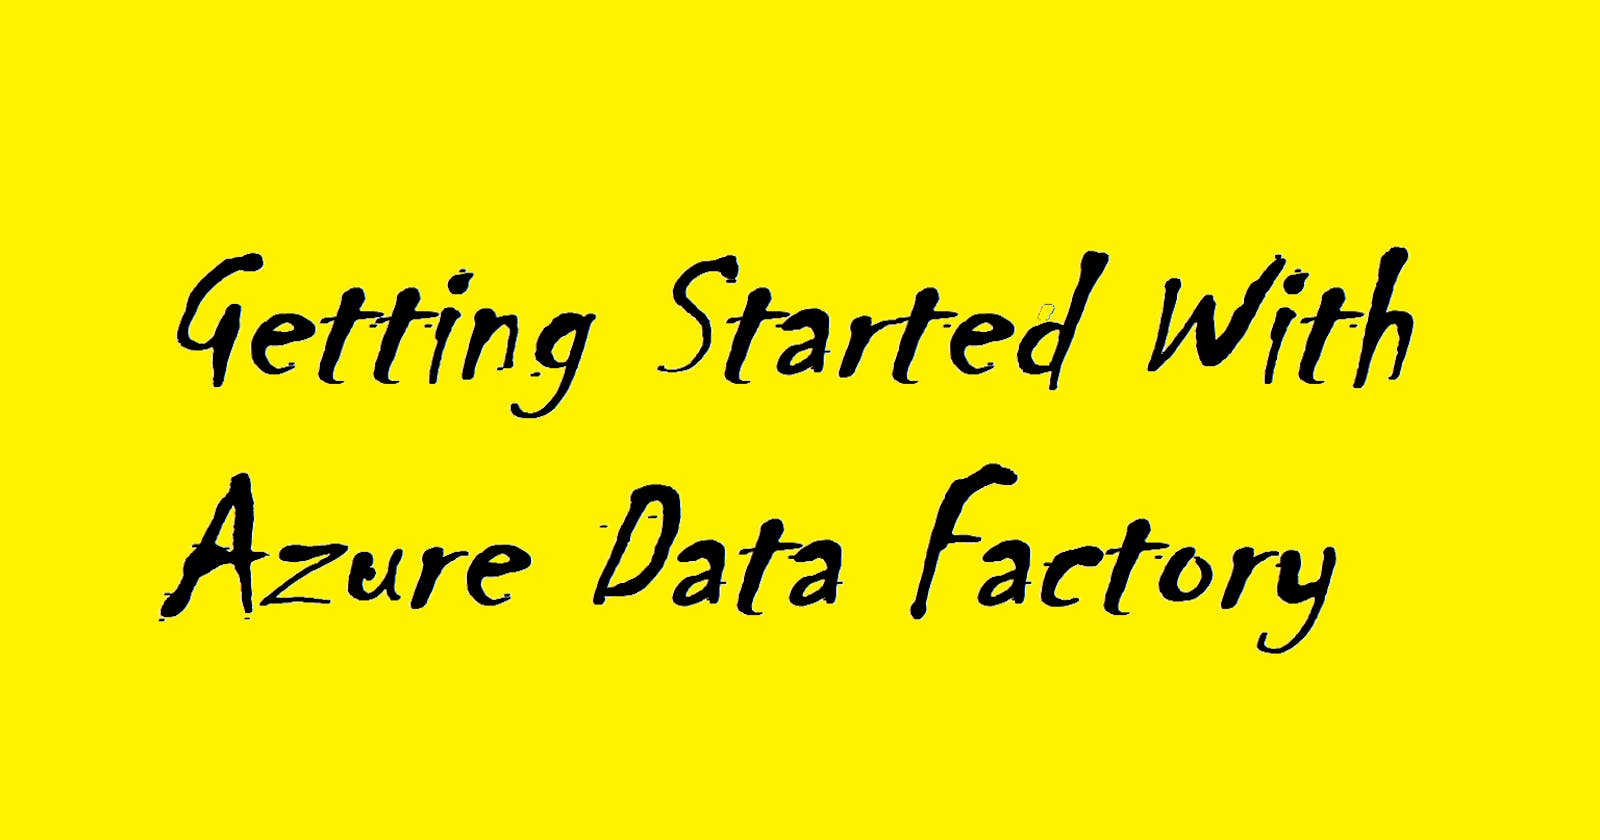 Getting Started with Azure Data Factory